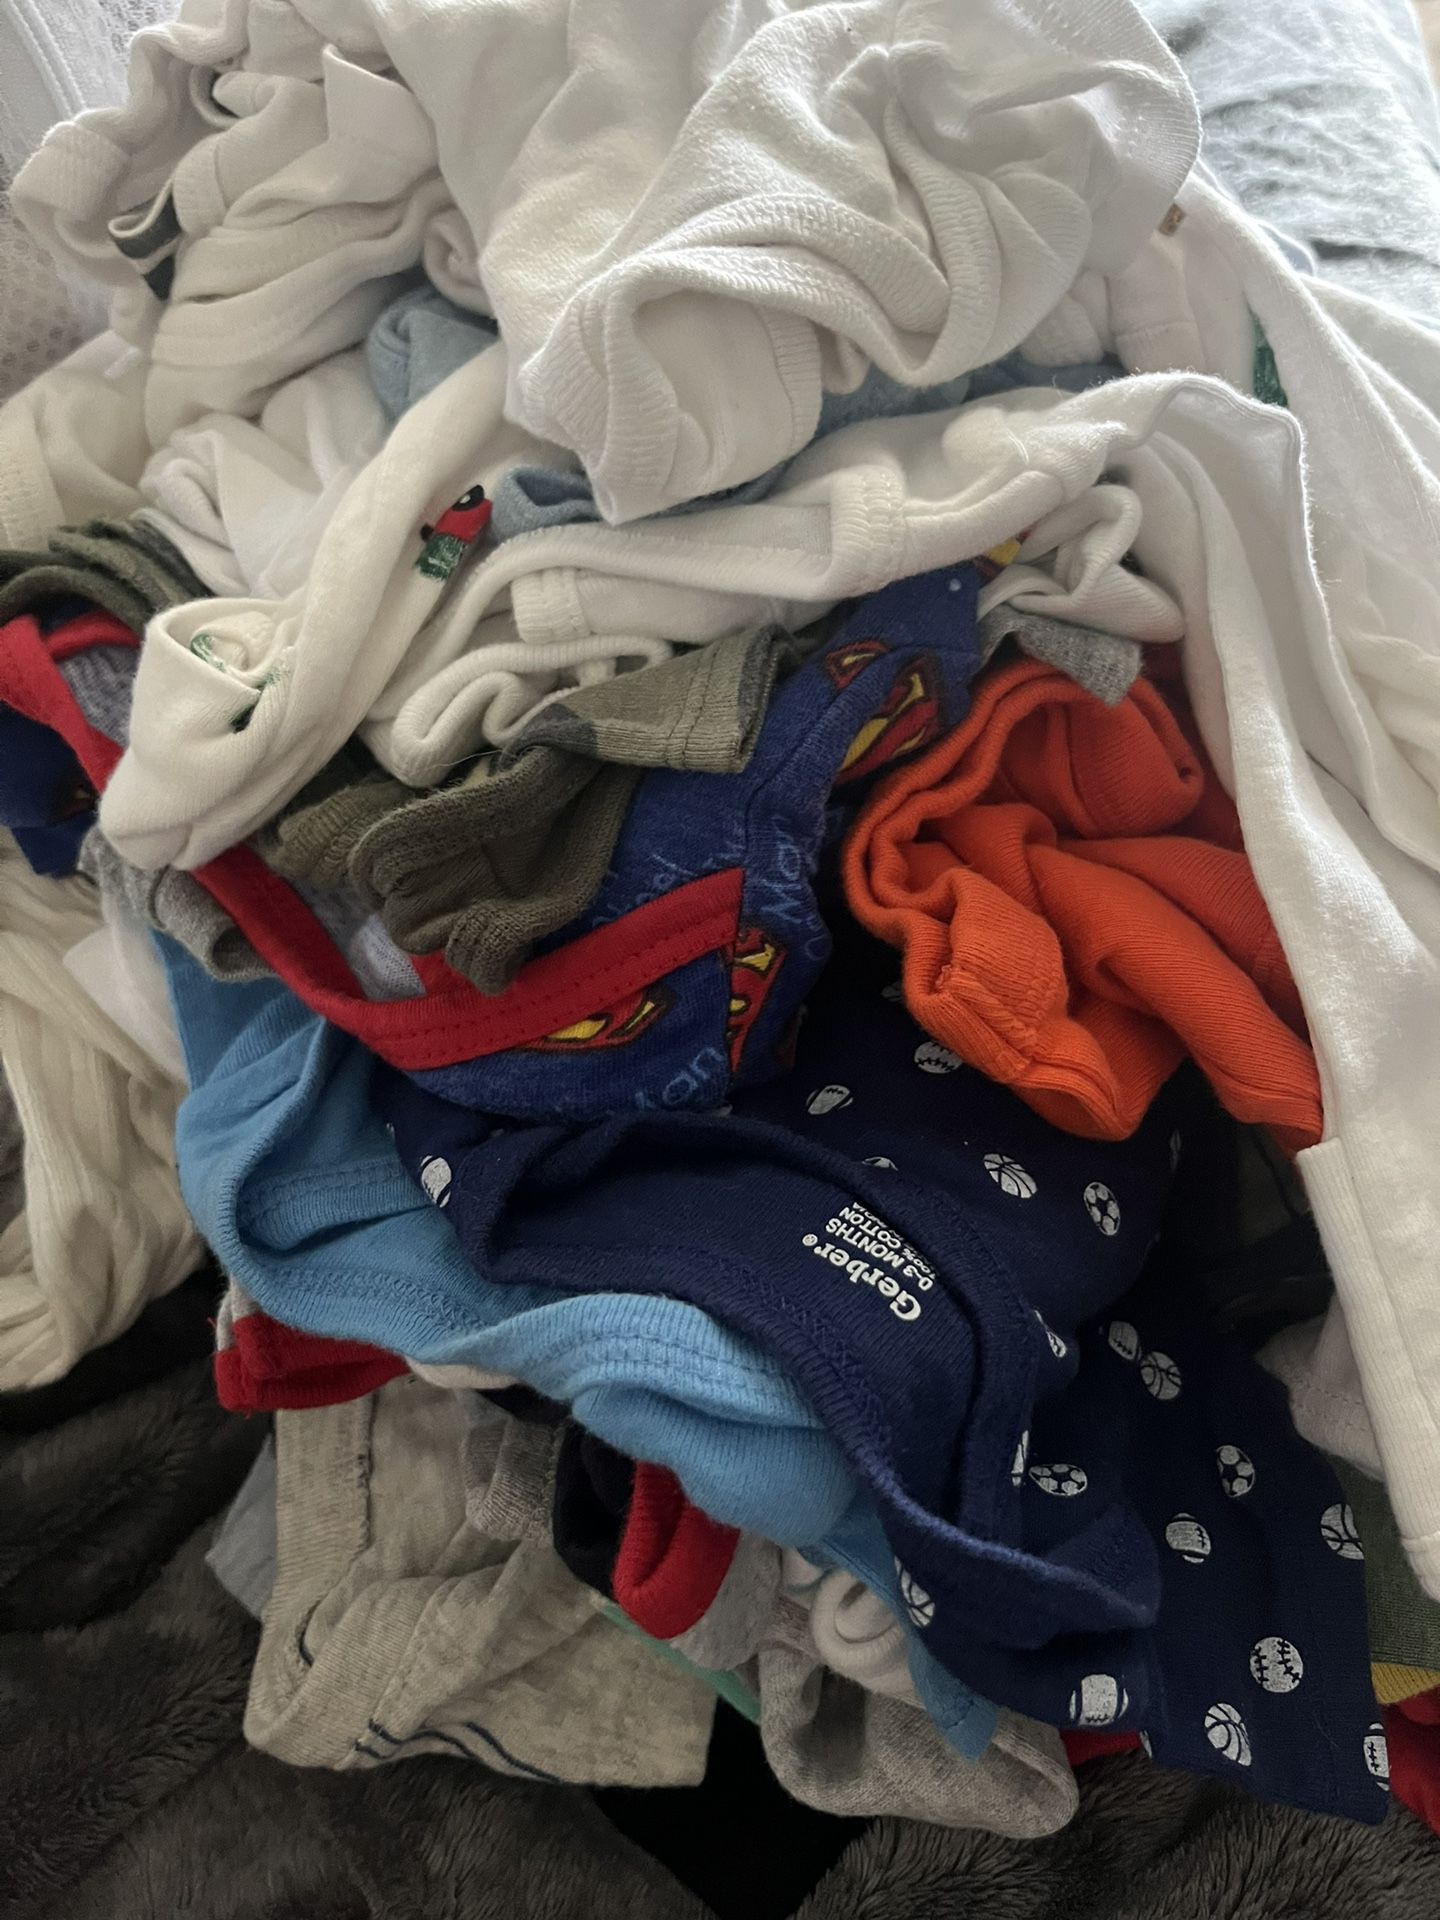 FREE Bag Of Baby Boy Clothes